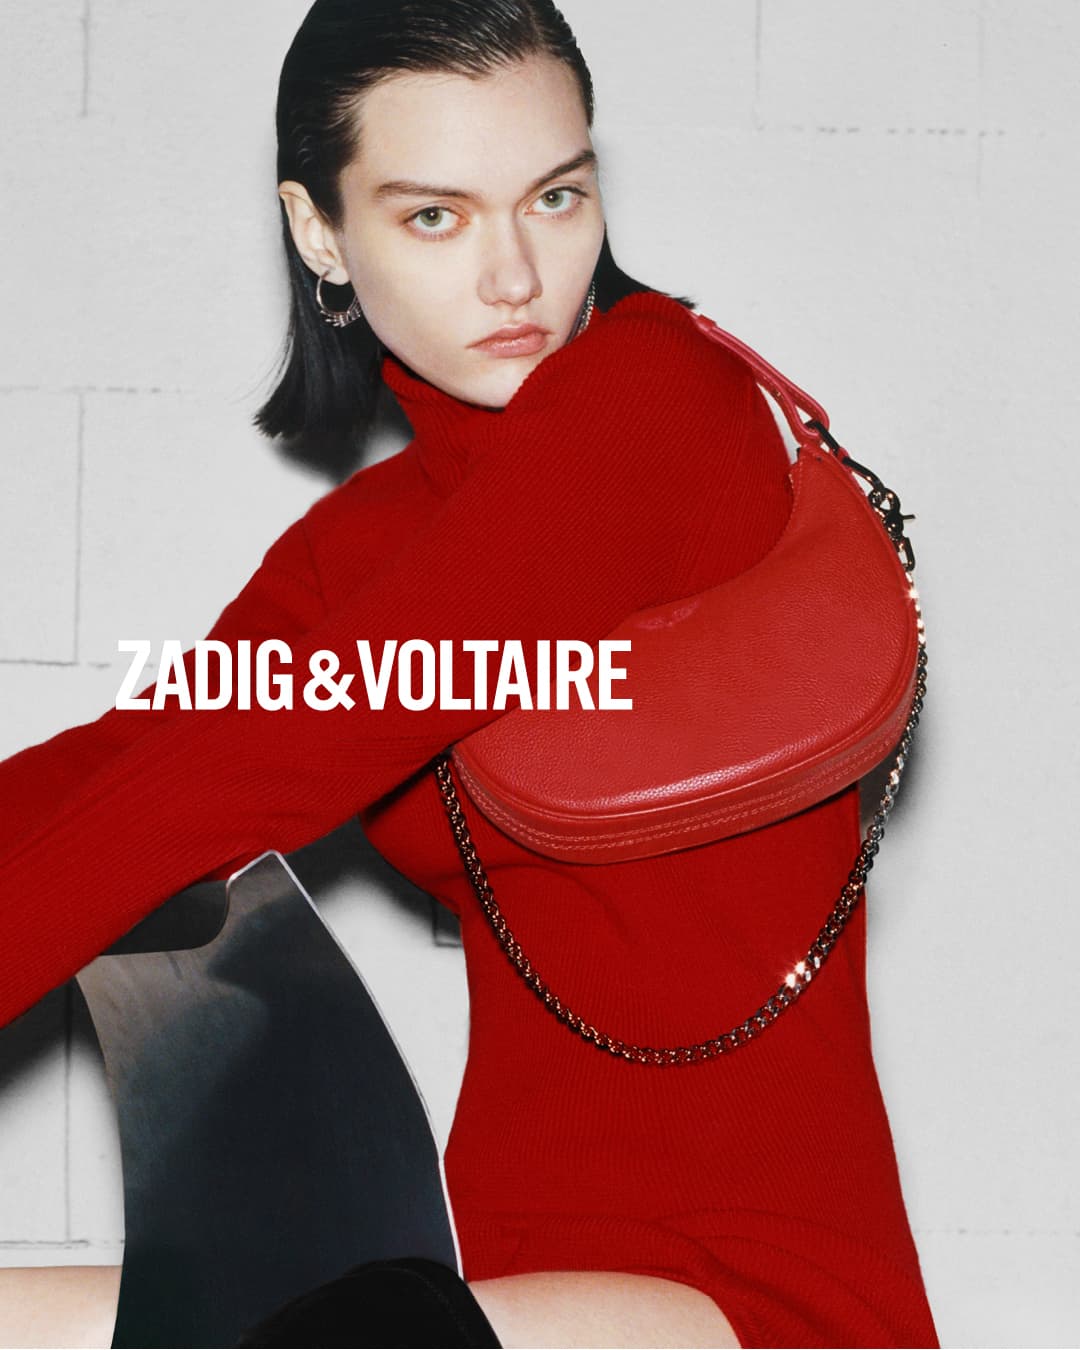 Zadig & Voltaire Fall 2023 Ad Campaign Review | The Impression